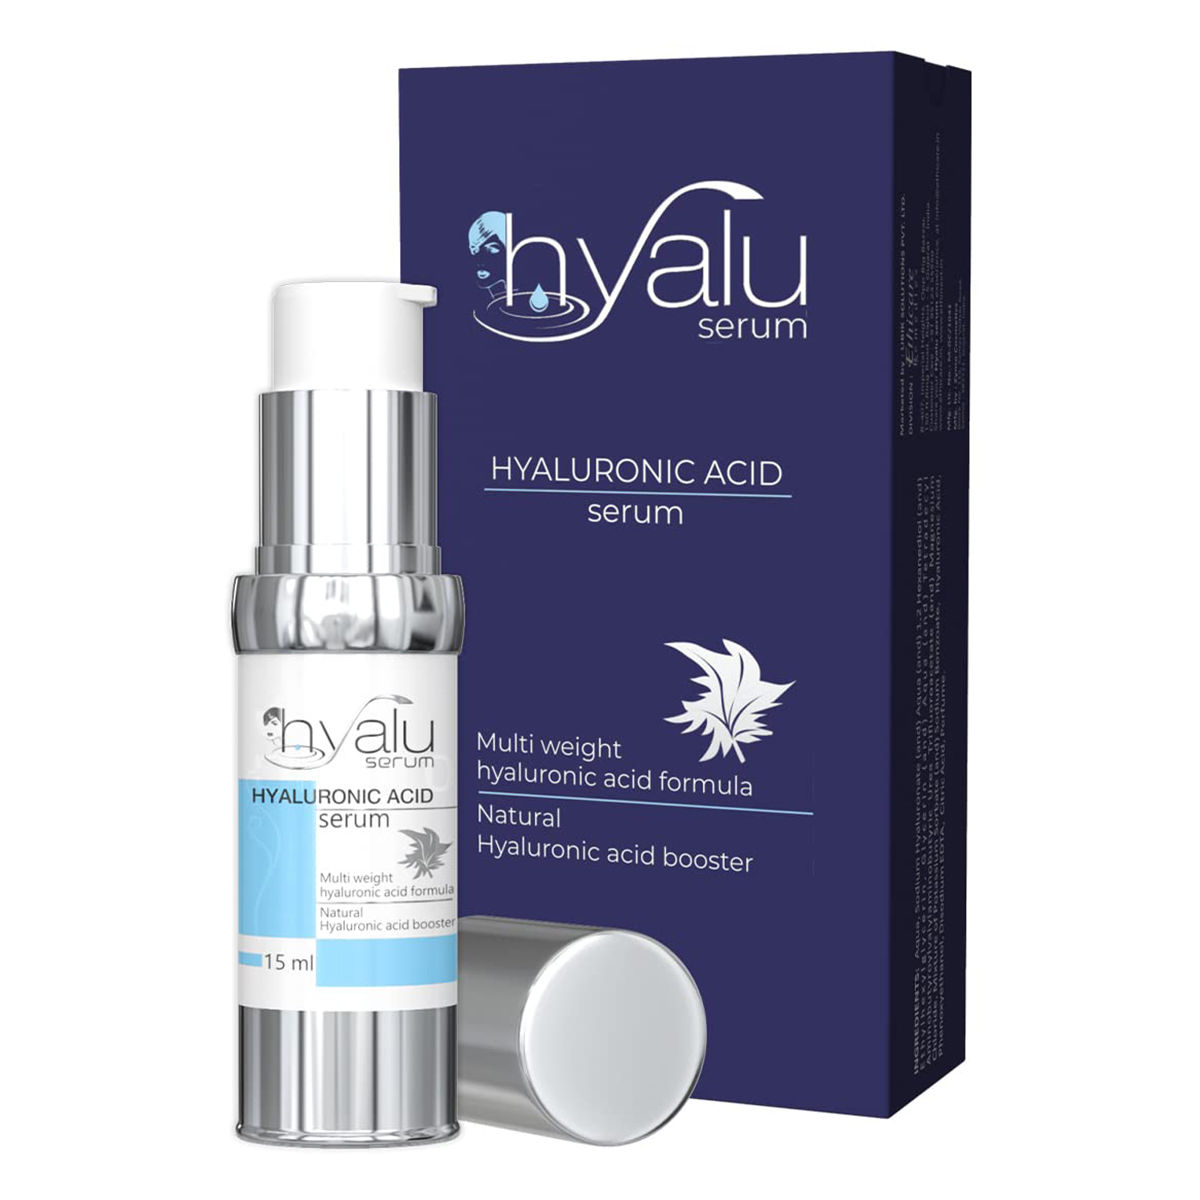 Hyalu Serum 15Ml Price, Uses, Side Effects, Composition - Apollo Pharmacy